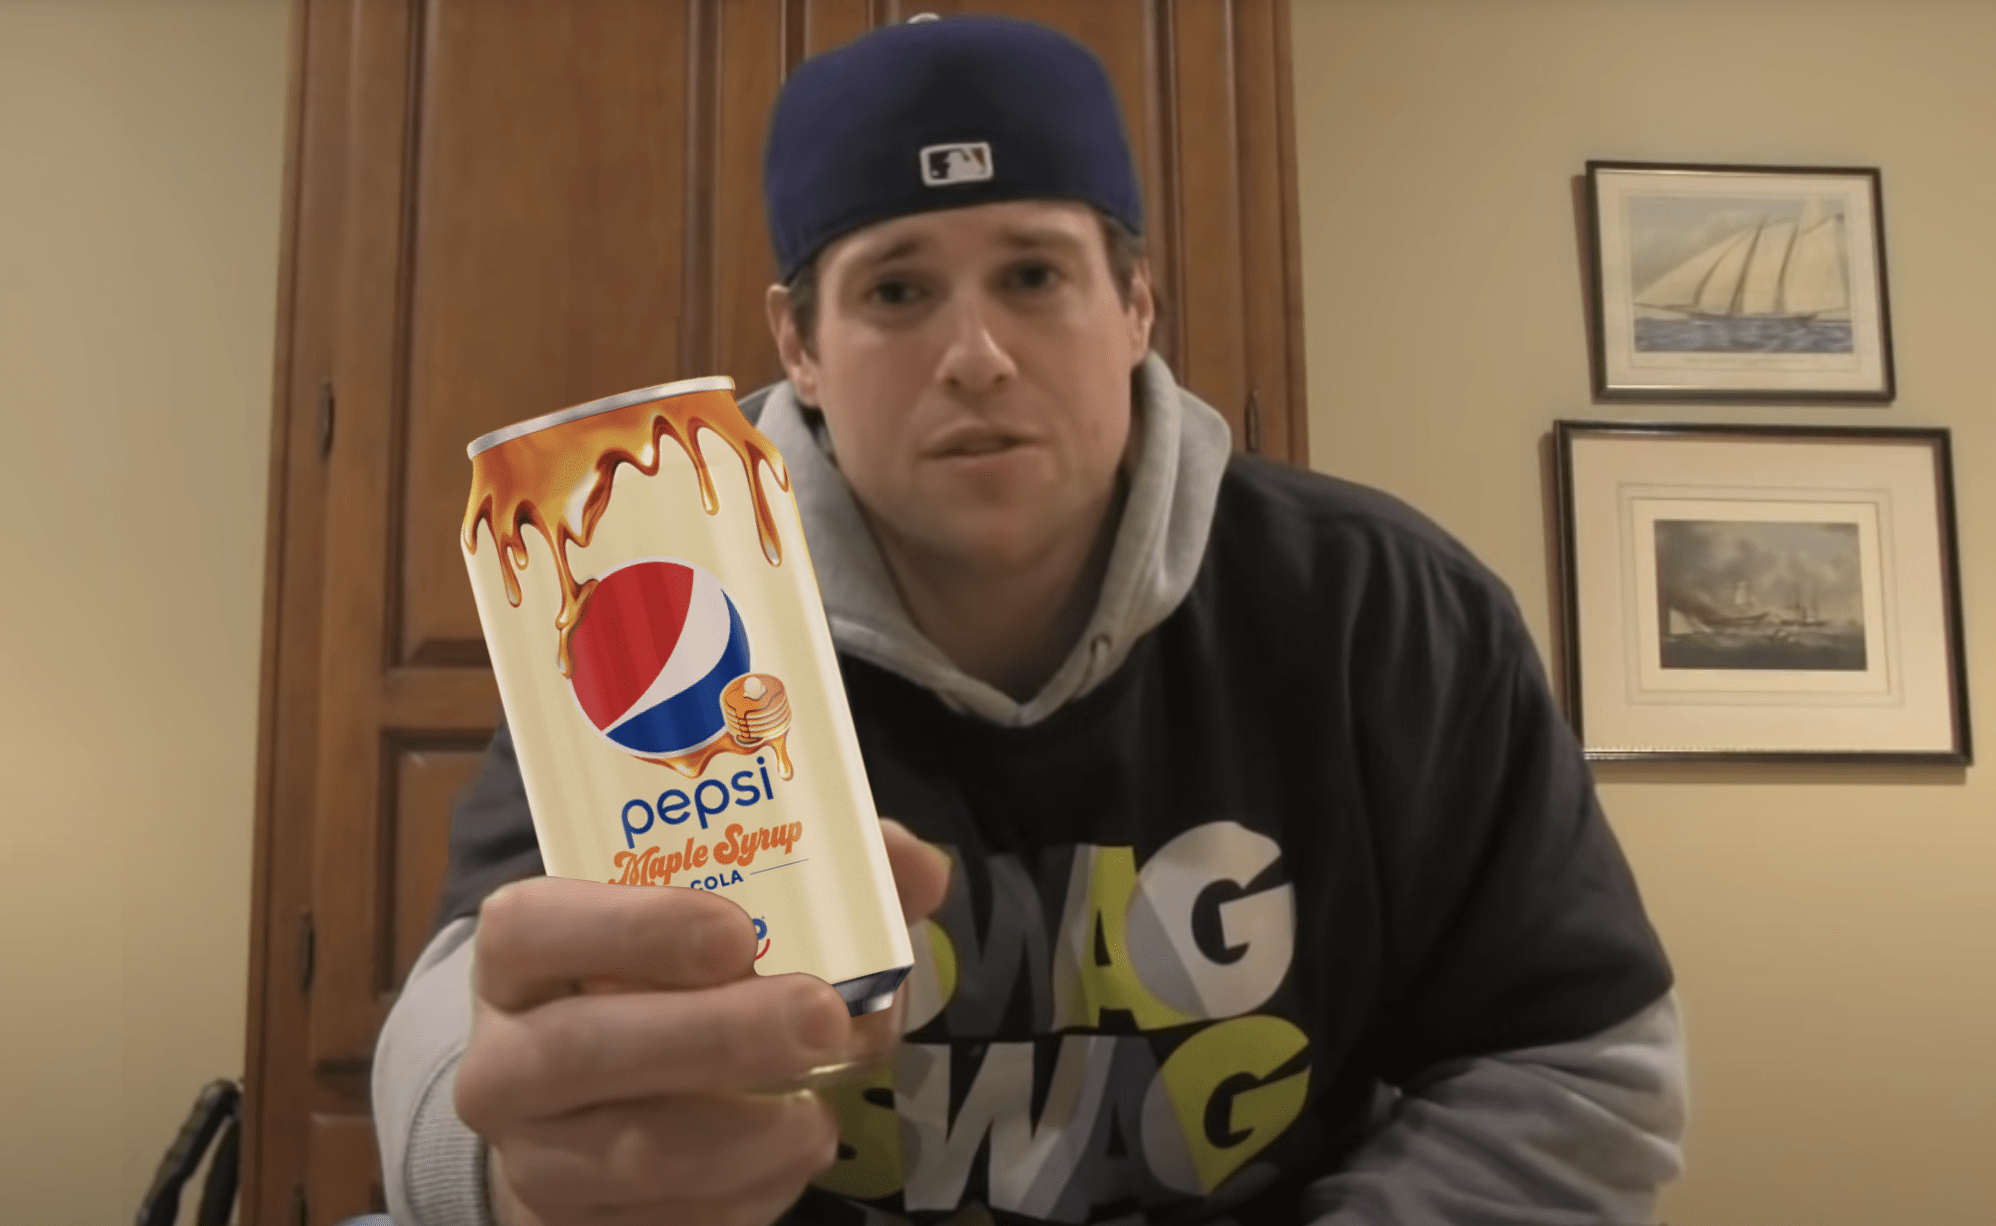 Is Maple Syrup Pepsi Good?